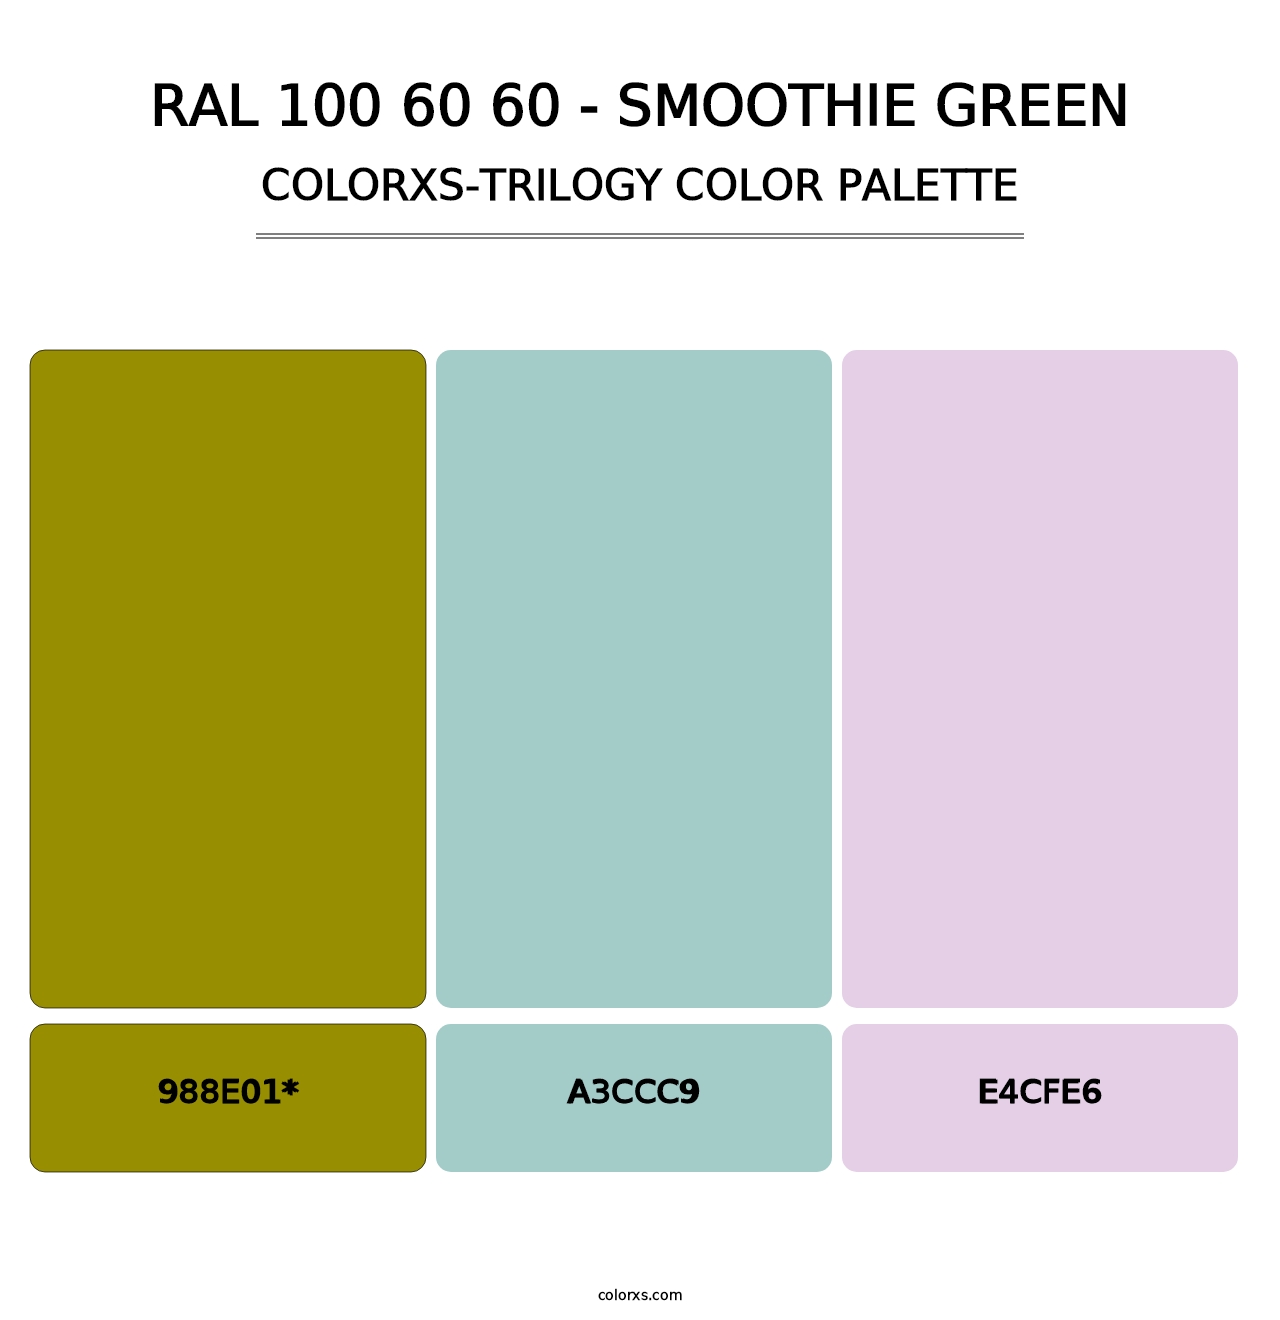 RAL 100 60 60 - Smoothie Green - Colorxs Trilogy Palette